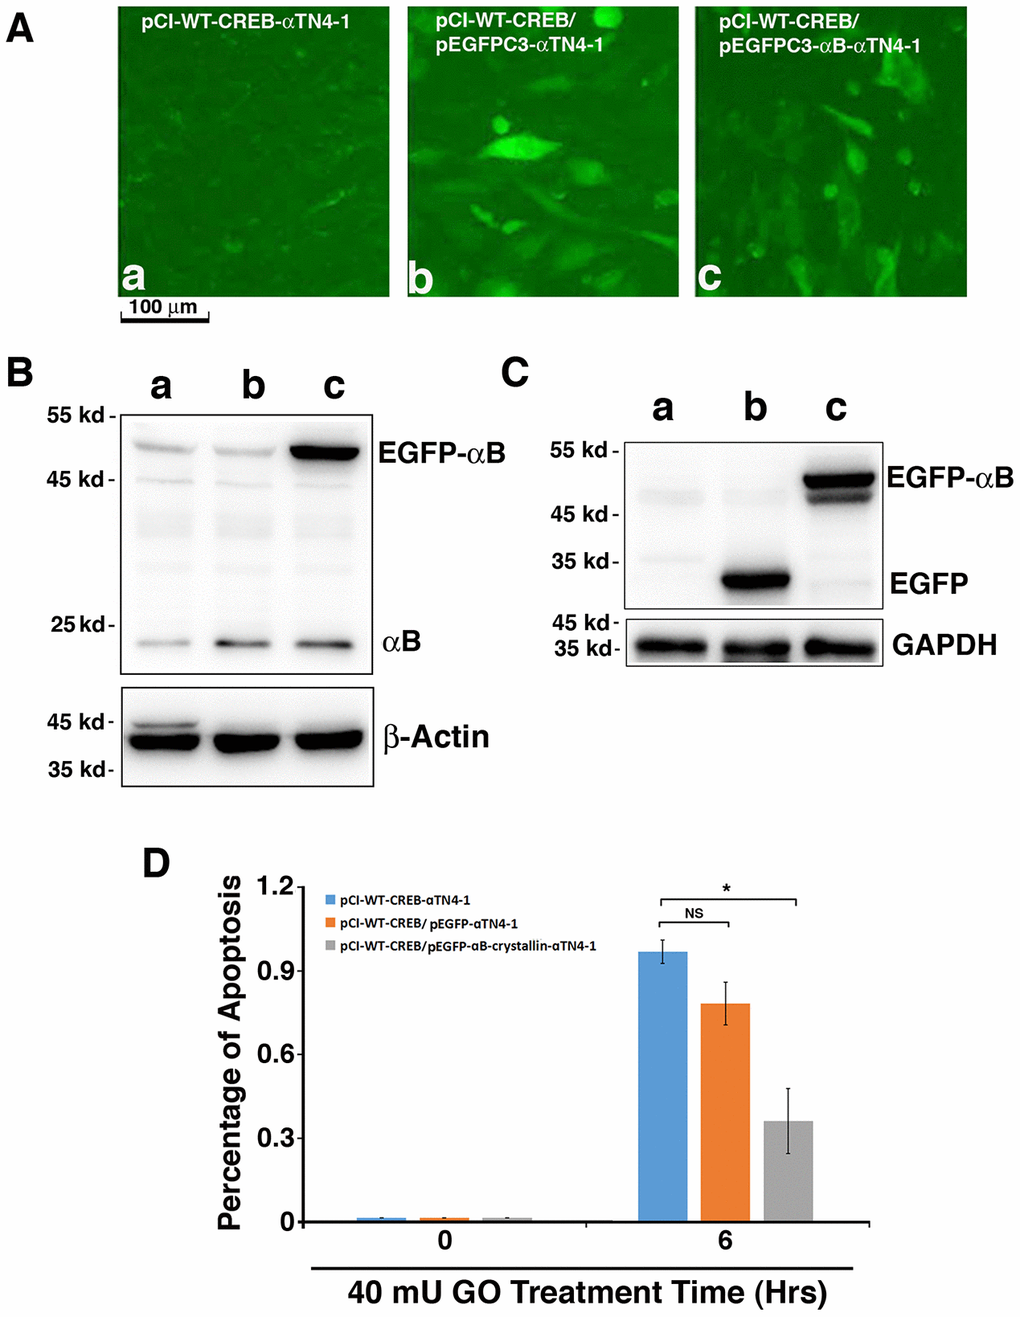 Exogenous human αB-crystallin restores the ability of pCI-CREB-αTN4-1 cells against hydrogen peroxide-induced apoptosis. (A) The pCI-CREB-αTN4-1 cells were either untransfected (A-a), or transfected with pEGFPC3 vector (A-b), or pEGFPC3-HαB (A-c) transiently. Transfection was confirmed by fluorescence microscopy. The pEGFPC3 vector-transfected pCI-CREB-αTN4-1 cells displayed homogenous distribution of green fluorescence protein in the whole cells (A-b). In contrast, in the pEGFPC3-HαB-transfected pCI-CREB-αTN4-1 cells, the green fluorescence fusion protein was largely restricted in the cytoplasm (A-c). (B) Western blot analysis of the expression level of endogenous αB-crystallin and GFP-αB fusion protein in pCI-CREB-αTN4-1 cells (a), pCI-CREB-αTN4-1/pEGFPC3-αTN4-1 cells (b) and pCI-CREB-αTN4-1/pEGFPC3-HαB-αTN4-1 cells (c) detected with anti-αB antibody. (C) Western blot analysis of the expression level of GFP and GFP-αB fusion protein in pCI-CREB-αTN4-1 cells (a), pCI-CREB-αTN4-1/pEGFPC3-αTN4-1 cells (b) and pCI-CREB-αTN4-1/pEGFPC3-HαB-αTN4-1 cells (c) detected with anti-EGFP antibody. (D) After treatment by 40 mU GO for 6 hours, apoptosis in the 3 types of cells as indicated were analyzed. Note that pCI-CREB-αTN4-1/pEGFPC3-HαB-αTN4-1 cells expressing exogenous HαB displayed over 50% less apoptosis than pCI-CREB-αTN4-1 cells and pCI-CREB-αTN4-1/pEGFPC3-αTN4-1 cells. All experiments were repeated three times. Error bar represents standard deviation, N=3. * p NS, statistically not significant.